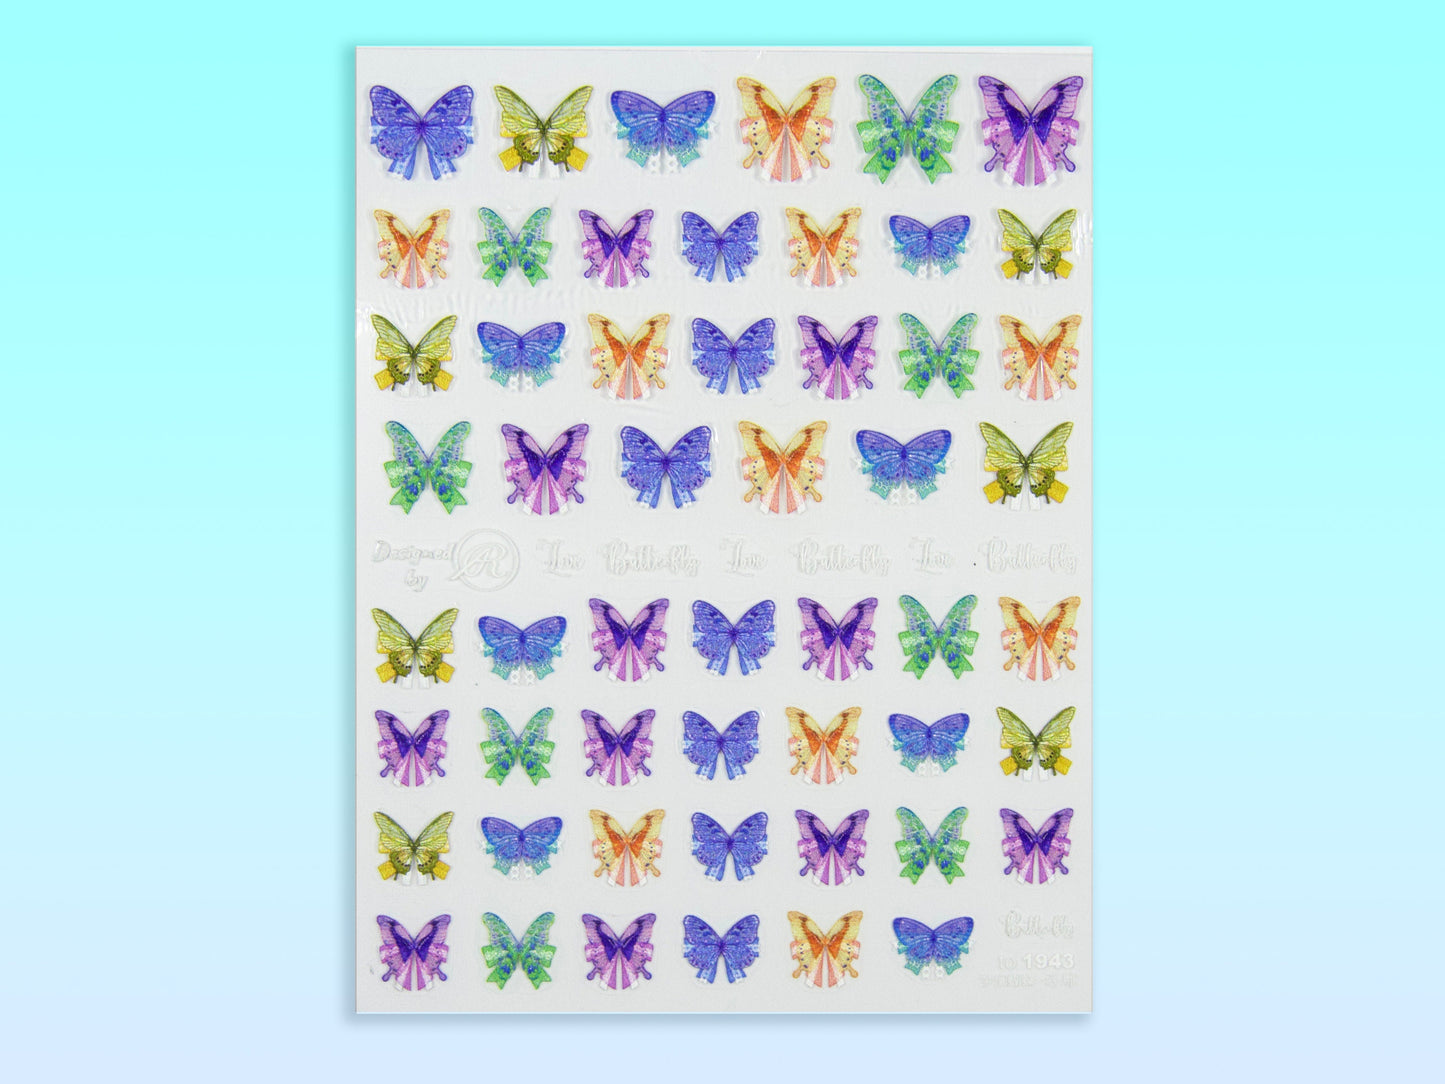 3D Embroidery Butterfly Sticker Nail Art